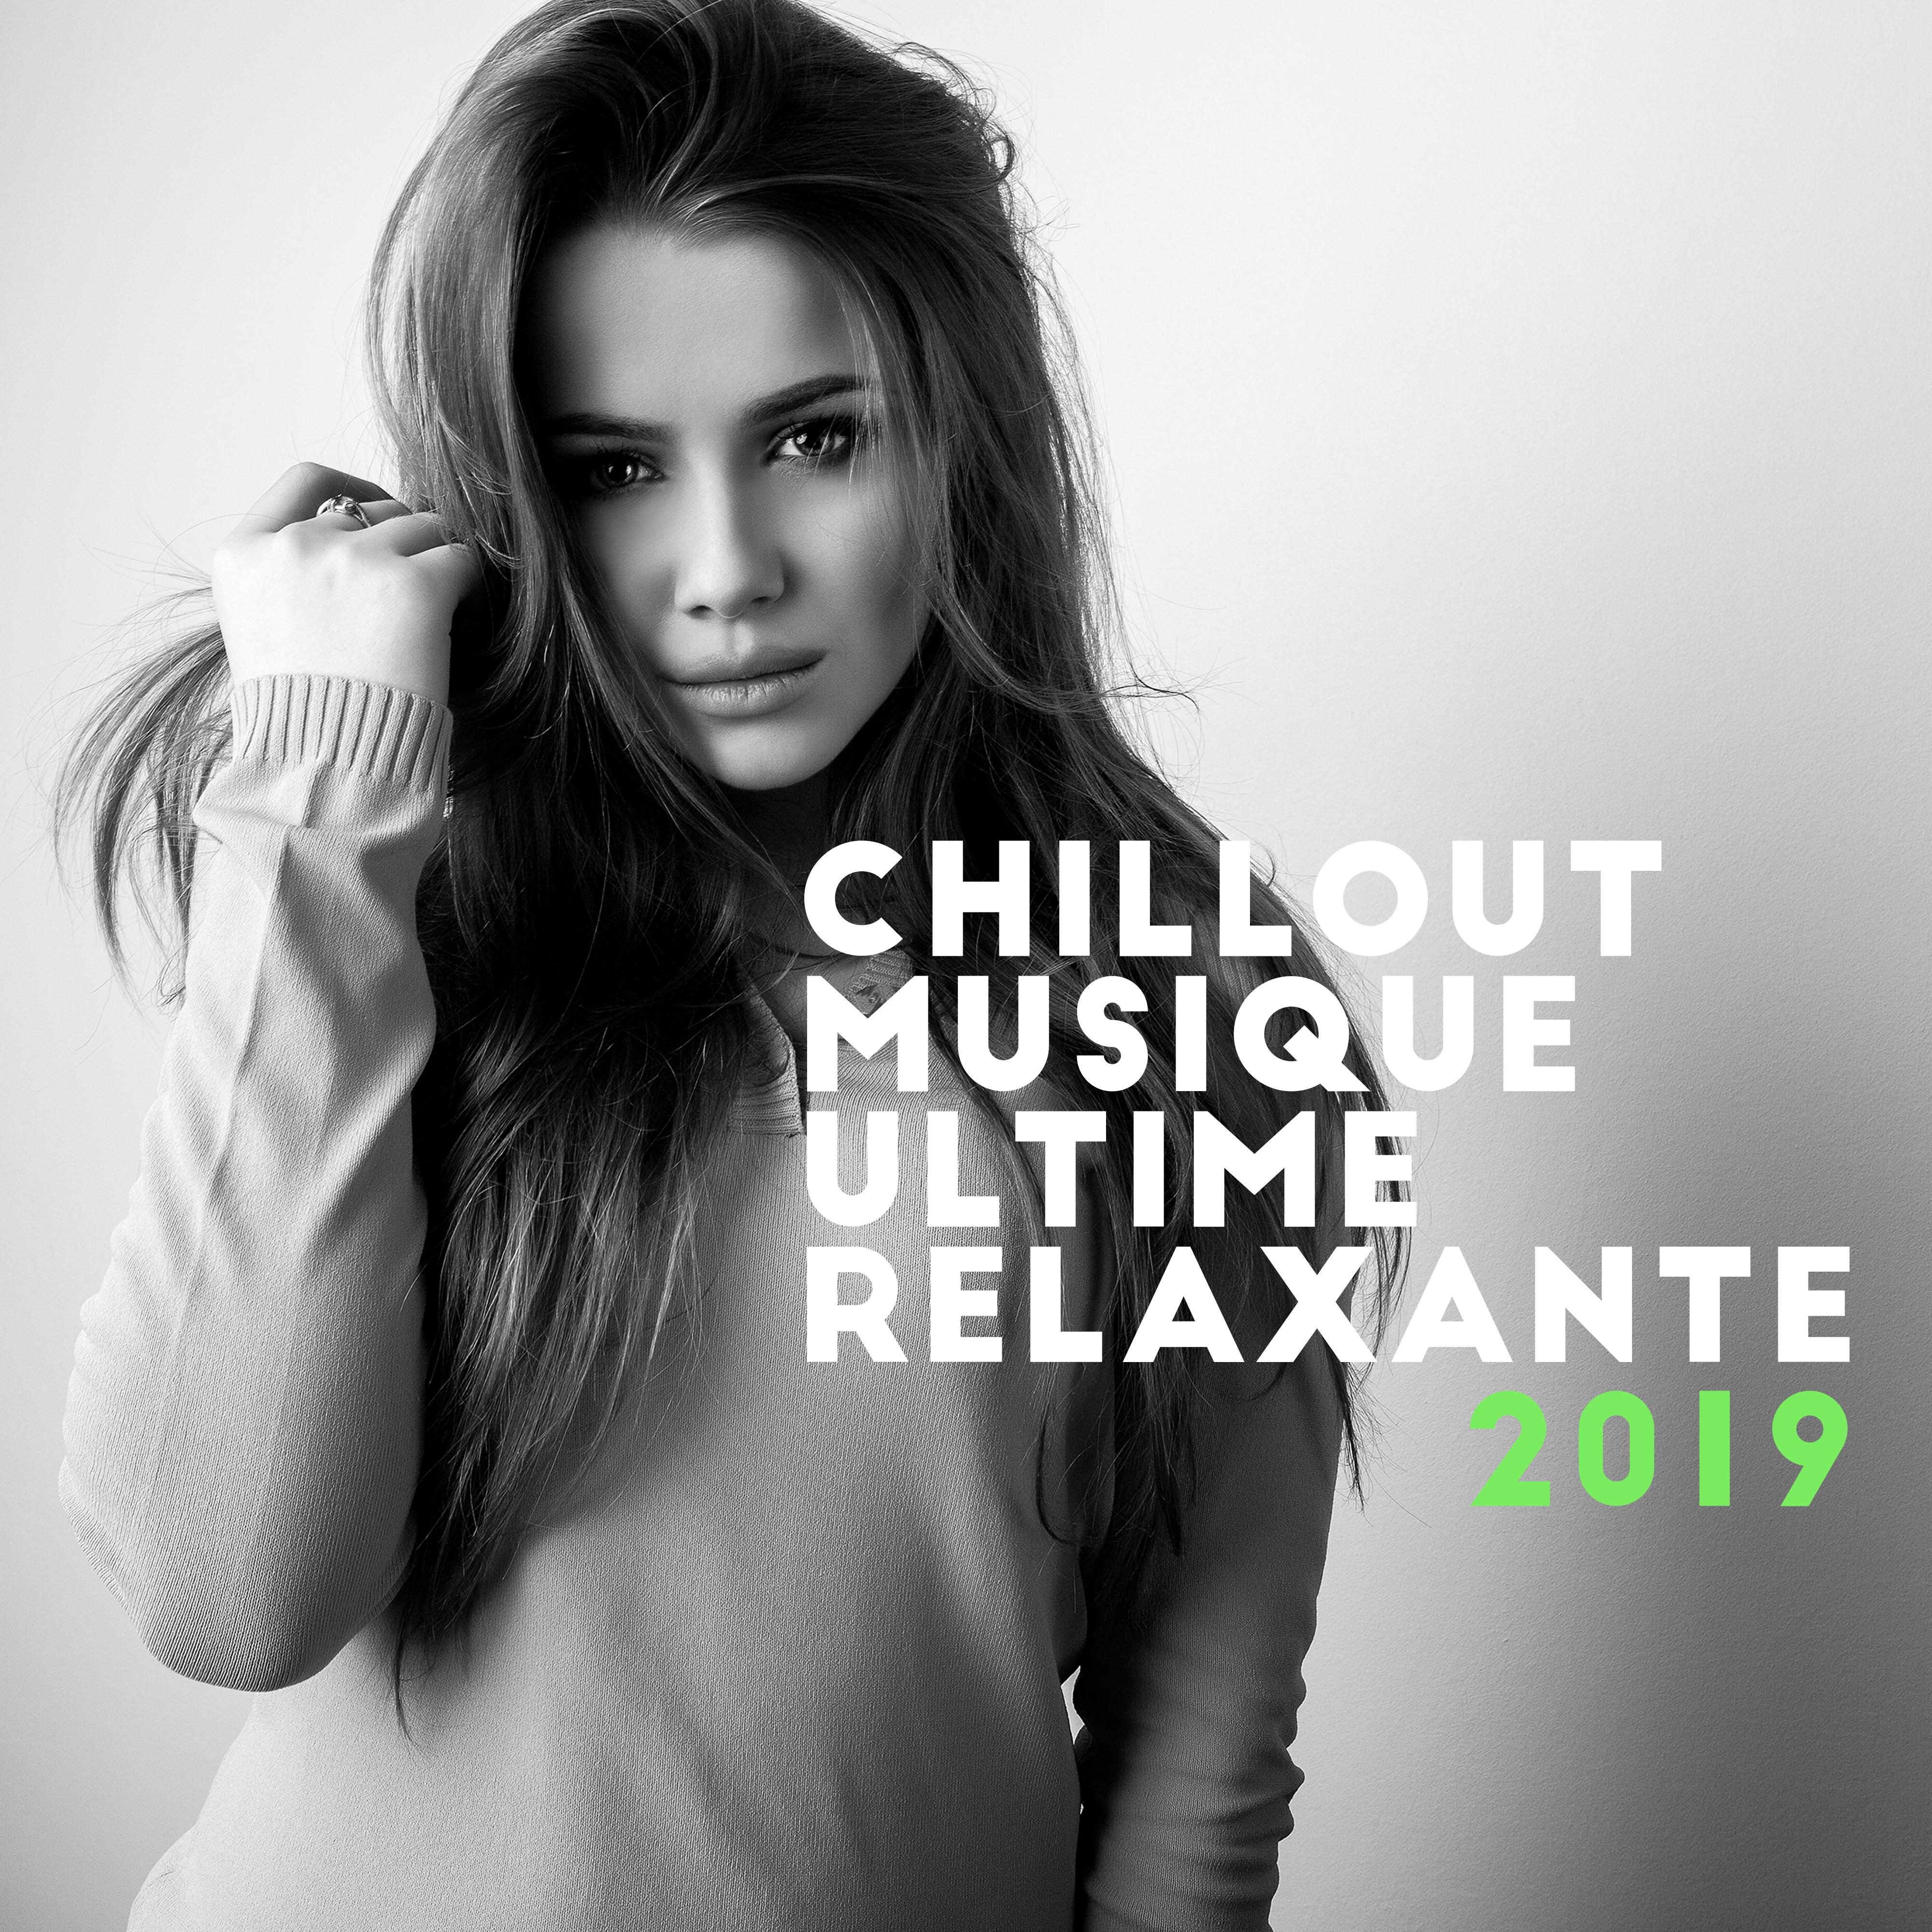 Chillout Musique Ultime Relaxante 2019